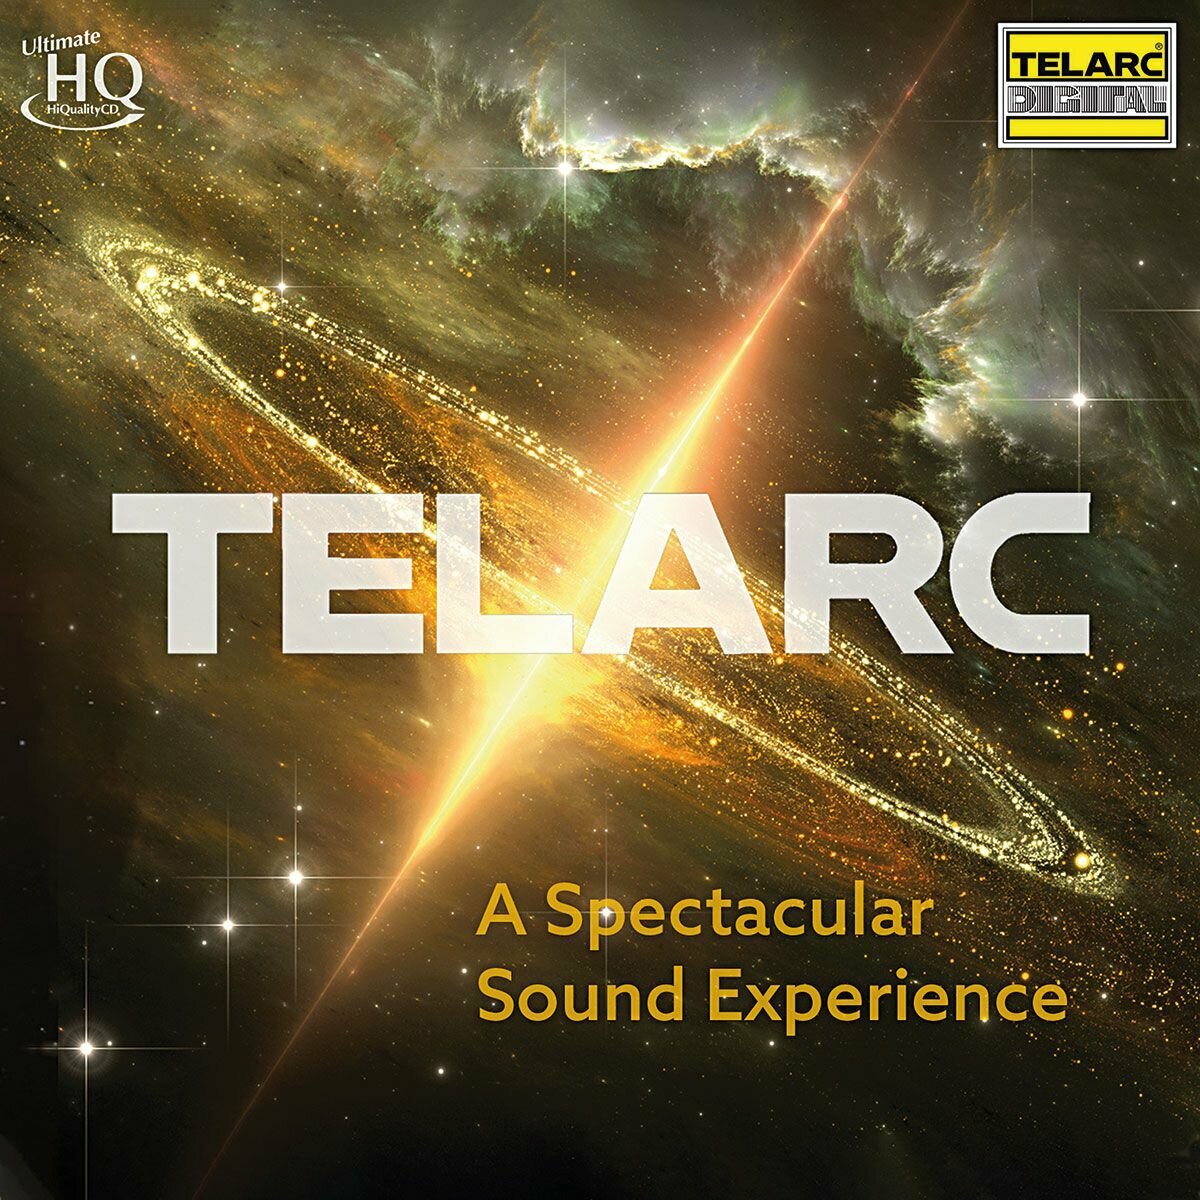 CD-диск Telarc - A Spectacular Sound Experience